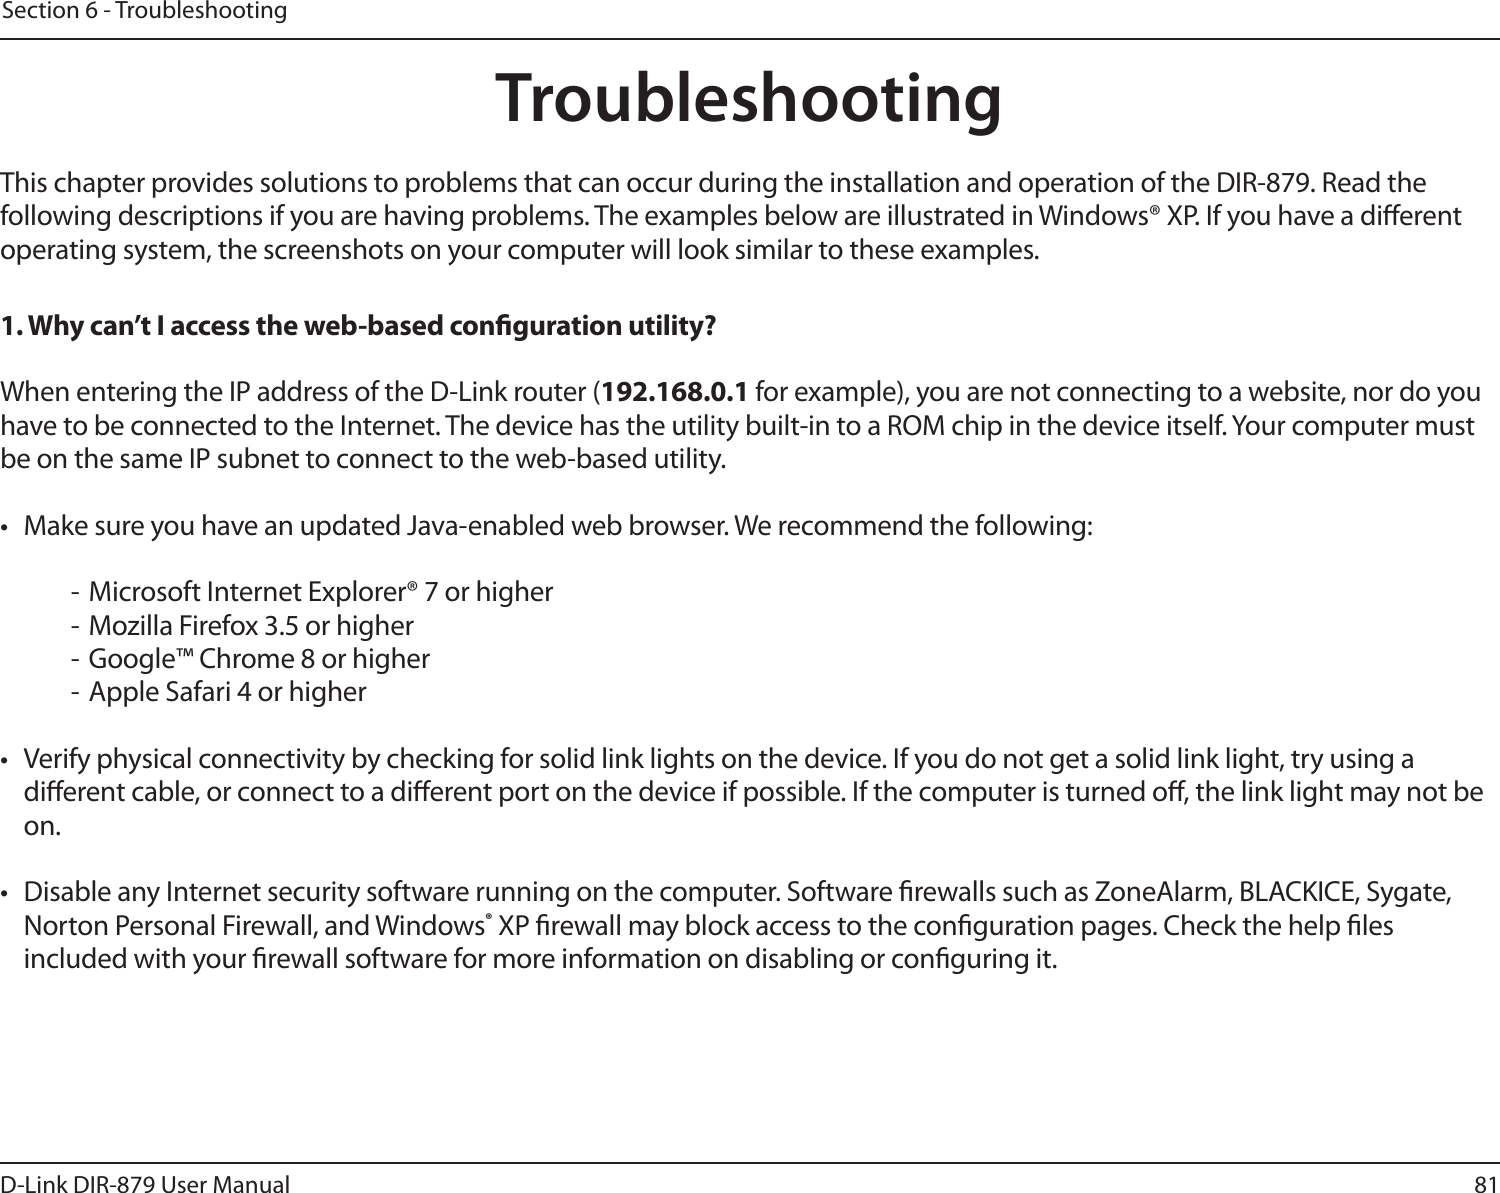 81D-Link DIR-879 User ManualSection 6 - TroubleshootingTroubleshootingThis chapter provides solutions to problems that can occur during the installation and operation of the DIR-879. Read the following descriptions if you are having problems. The examples below are illustrated in Windows® XP. If you have a dierent operating system, the screenshots on your computer will look similar to these examples.1. Why can’t I access the web-based conguration utility?When entering the IP address of the D-Link router (192.168.0.1 for example), you are not connecting to a website, nor do you have to be connected to the Internet. The device has the utility built-in to a ROM chip in the device itself. Your computer must be on the same IP subnet to connect to the web-based utility. •  Make sure you have an updated Java-enabled web browser. We recommend the following:  - Microsoft Internet Explorer® 7 or higher- Mozilla Firefox 3.5 or higher- Google™ Chrome 8 or higher- Apple Safari 4 or higher•  Verify physical connectivity by checking for solid link lights on the device. If you do not get a solid link light, try using a dierent cable, or connect to a dierent port on the device if possible. If the computer is turned o, the link light may not be on.•  Disable any Internet security software running on the computer. Software rewalls such as ZoneAlarm, BLACKICE, Sygate, Norton Personal Firewall, and Windows® XP rewall may block access to the conguration pages. Check the help les included with your rewall software for more information on disabling or conguring it.